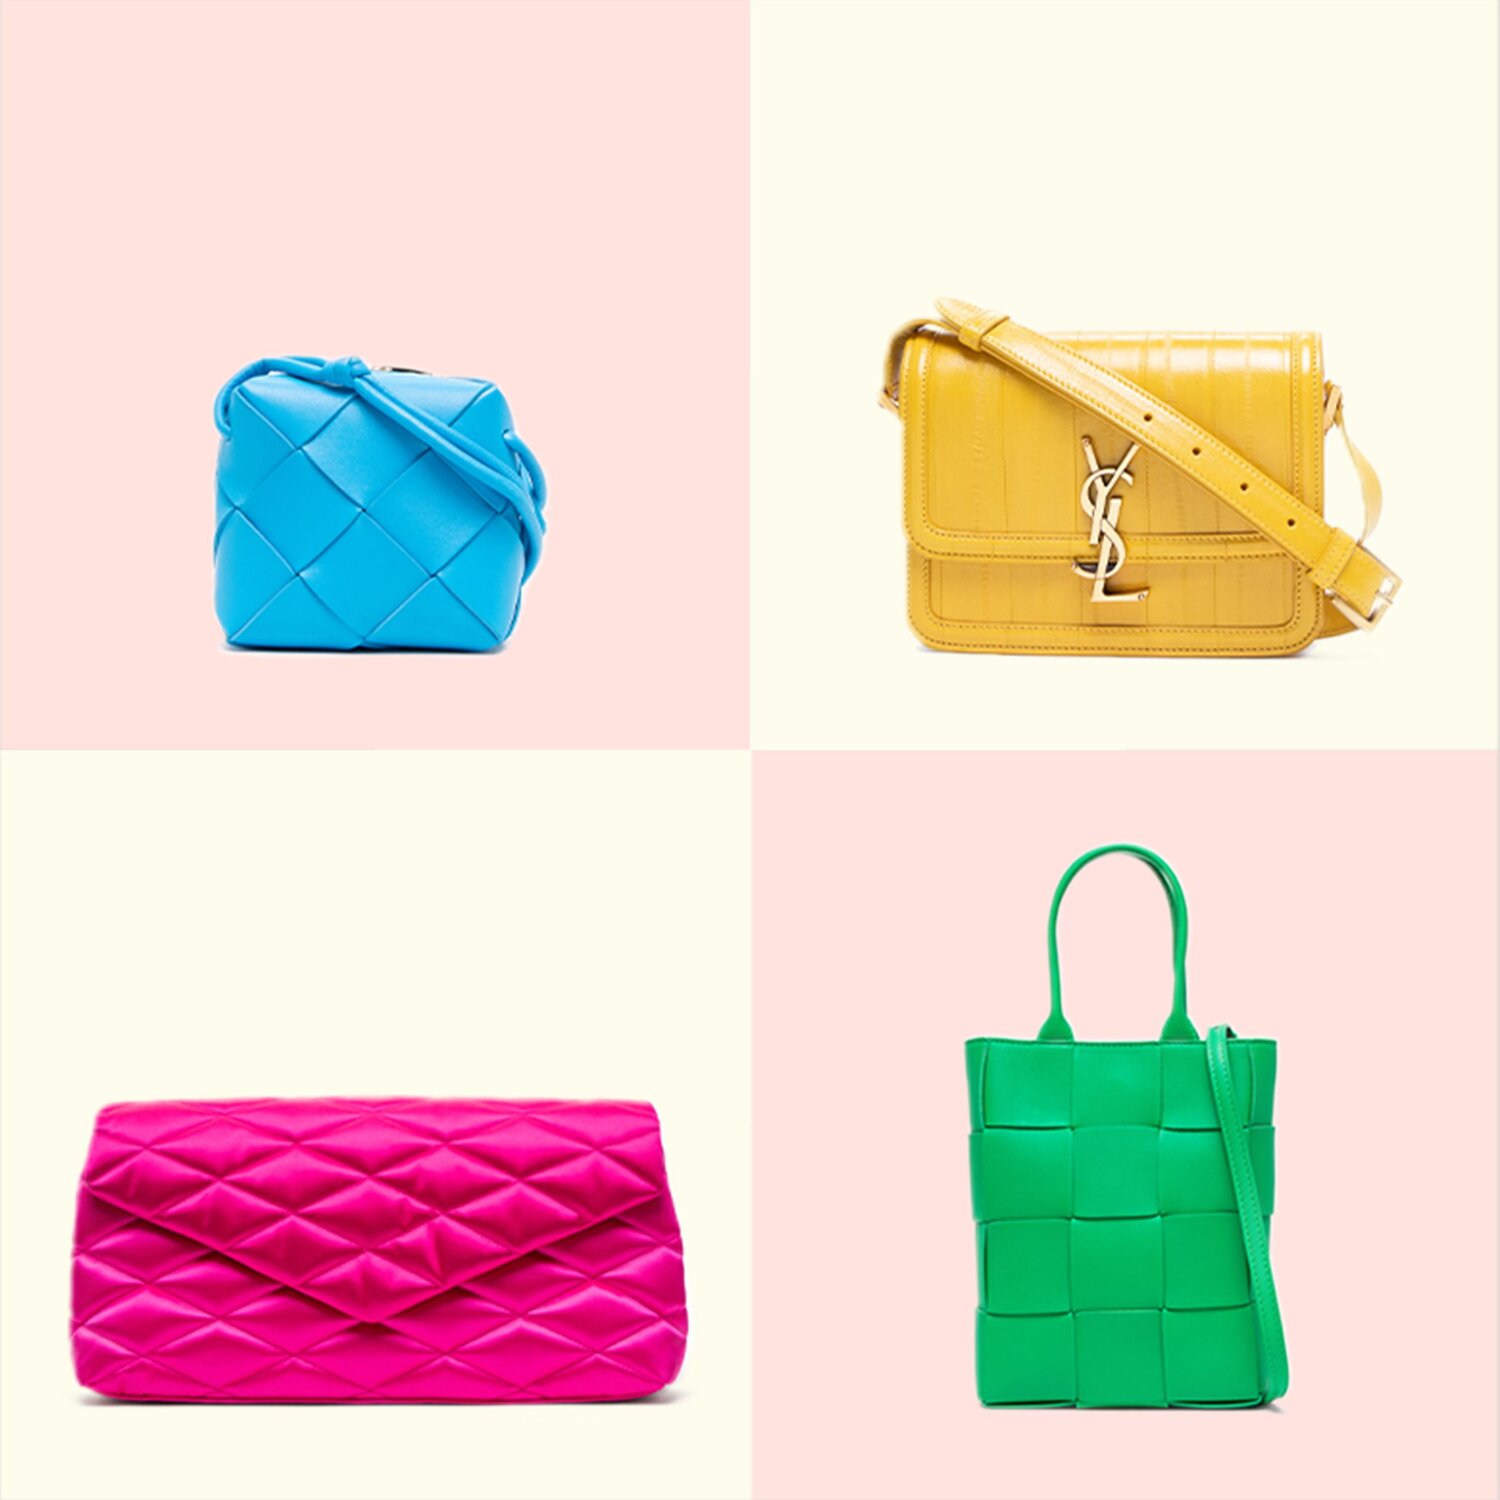 Image of colorful luxury handbags from Vivrelle, on colorful background colors.